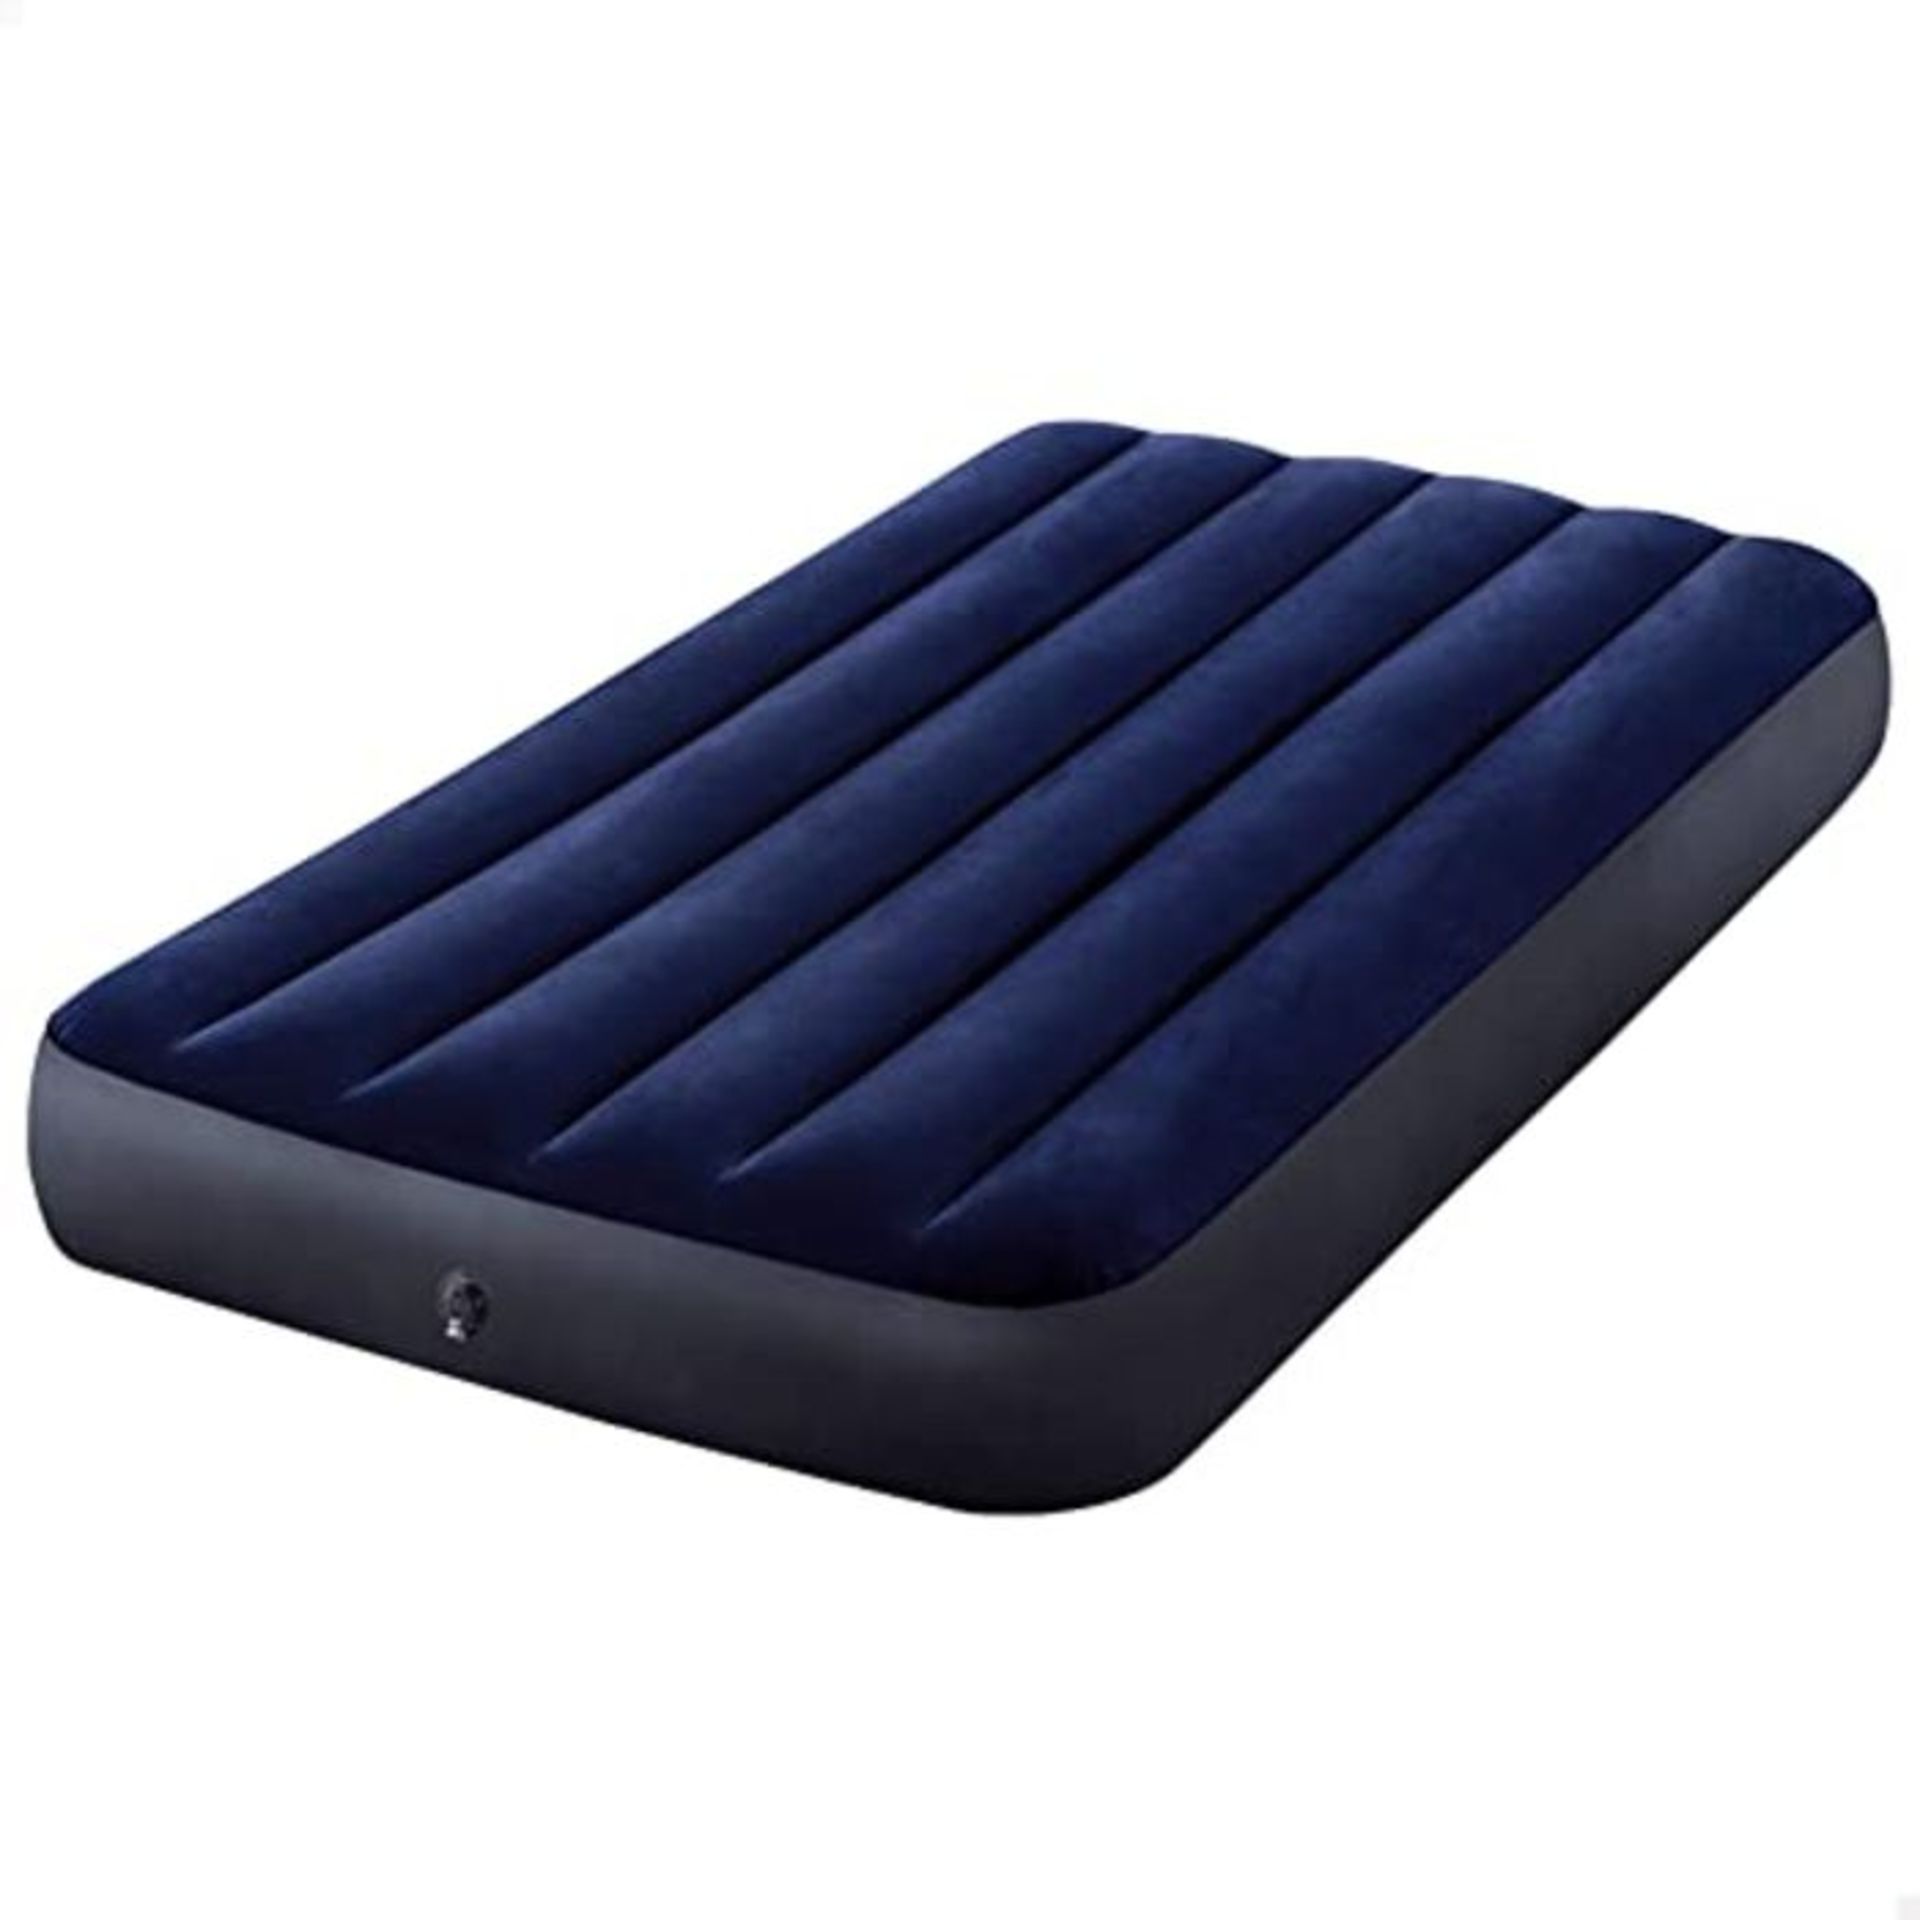 Intex Inflatable Bed, 64757, multicoloured, 99 x 191 x 25 cm